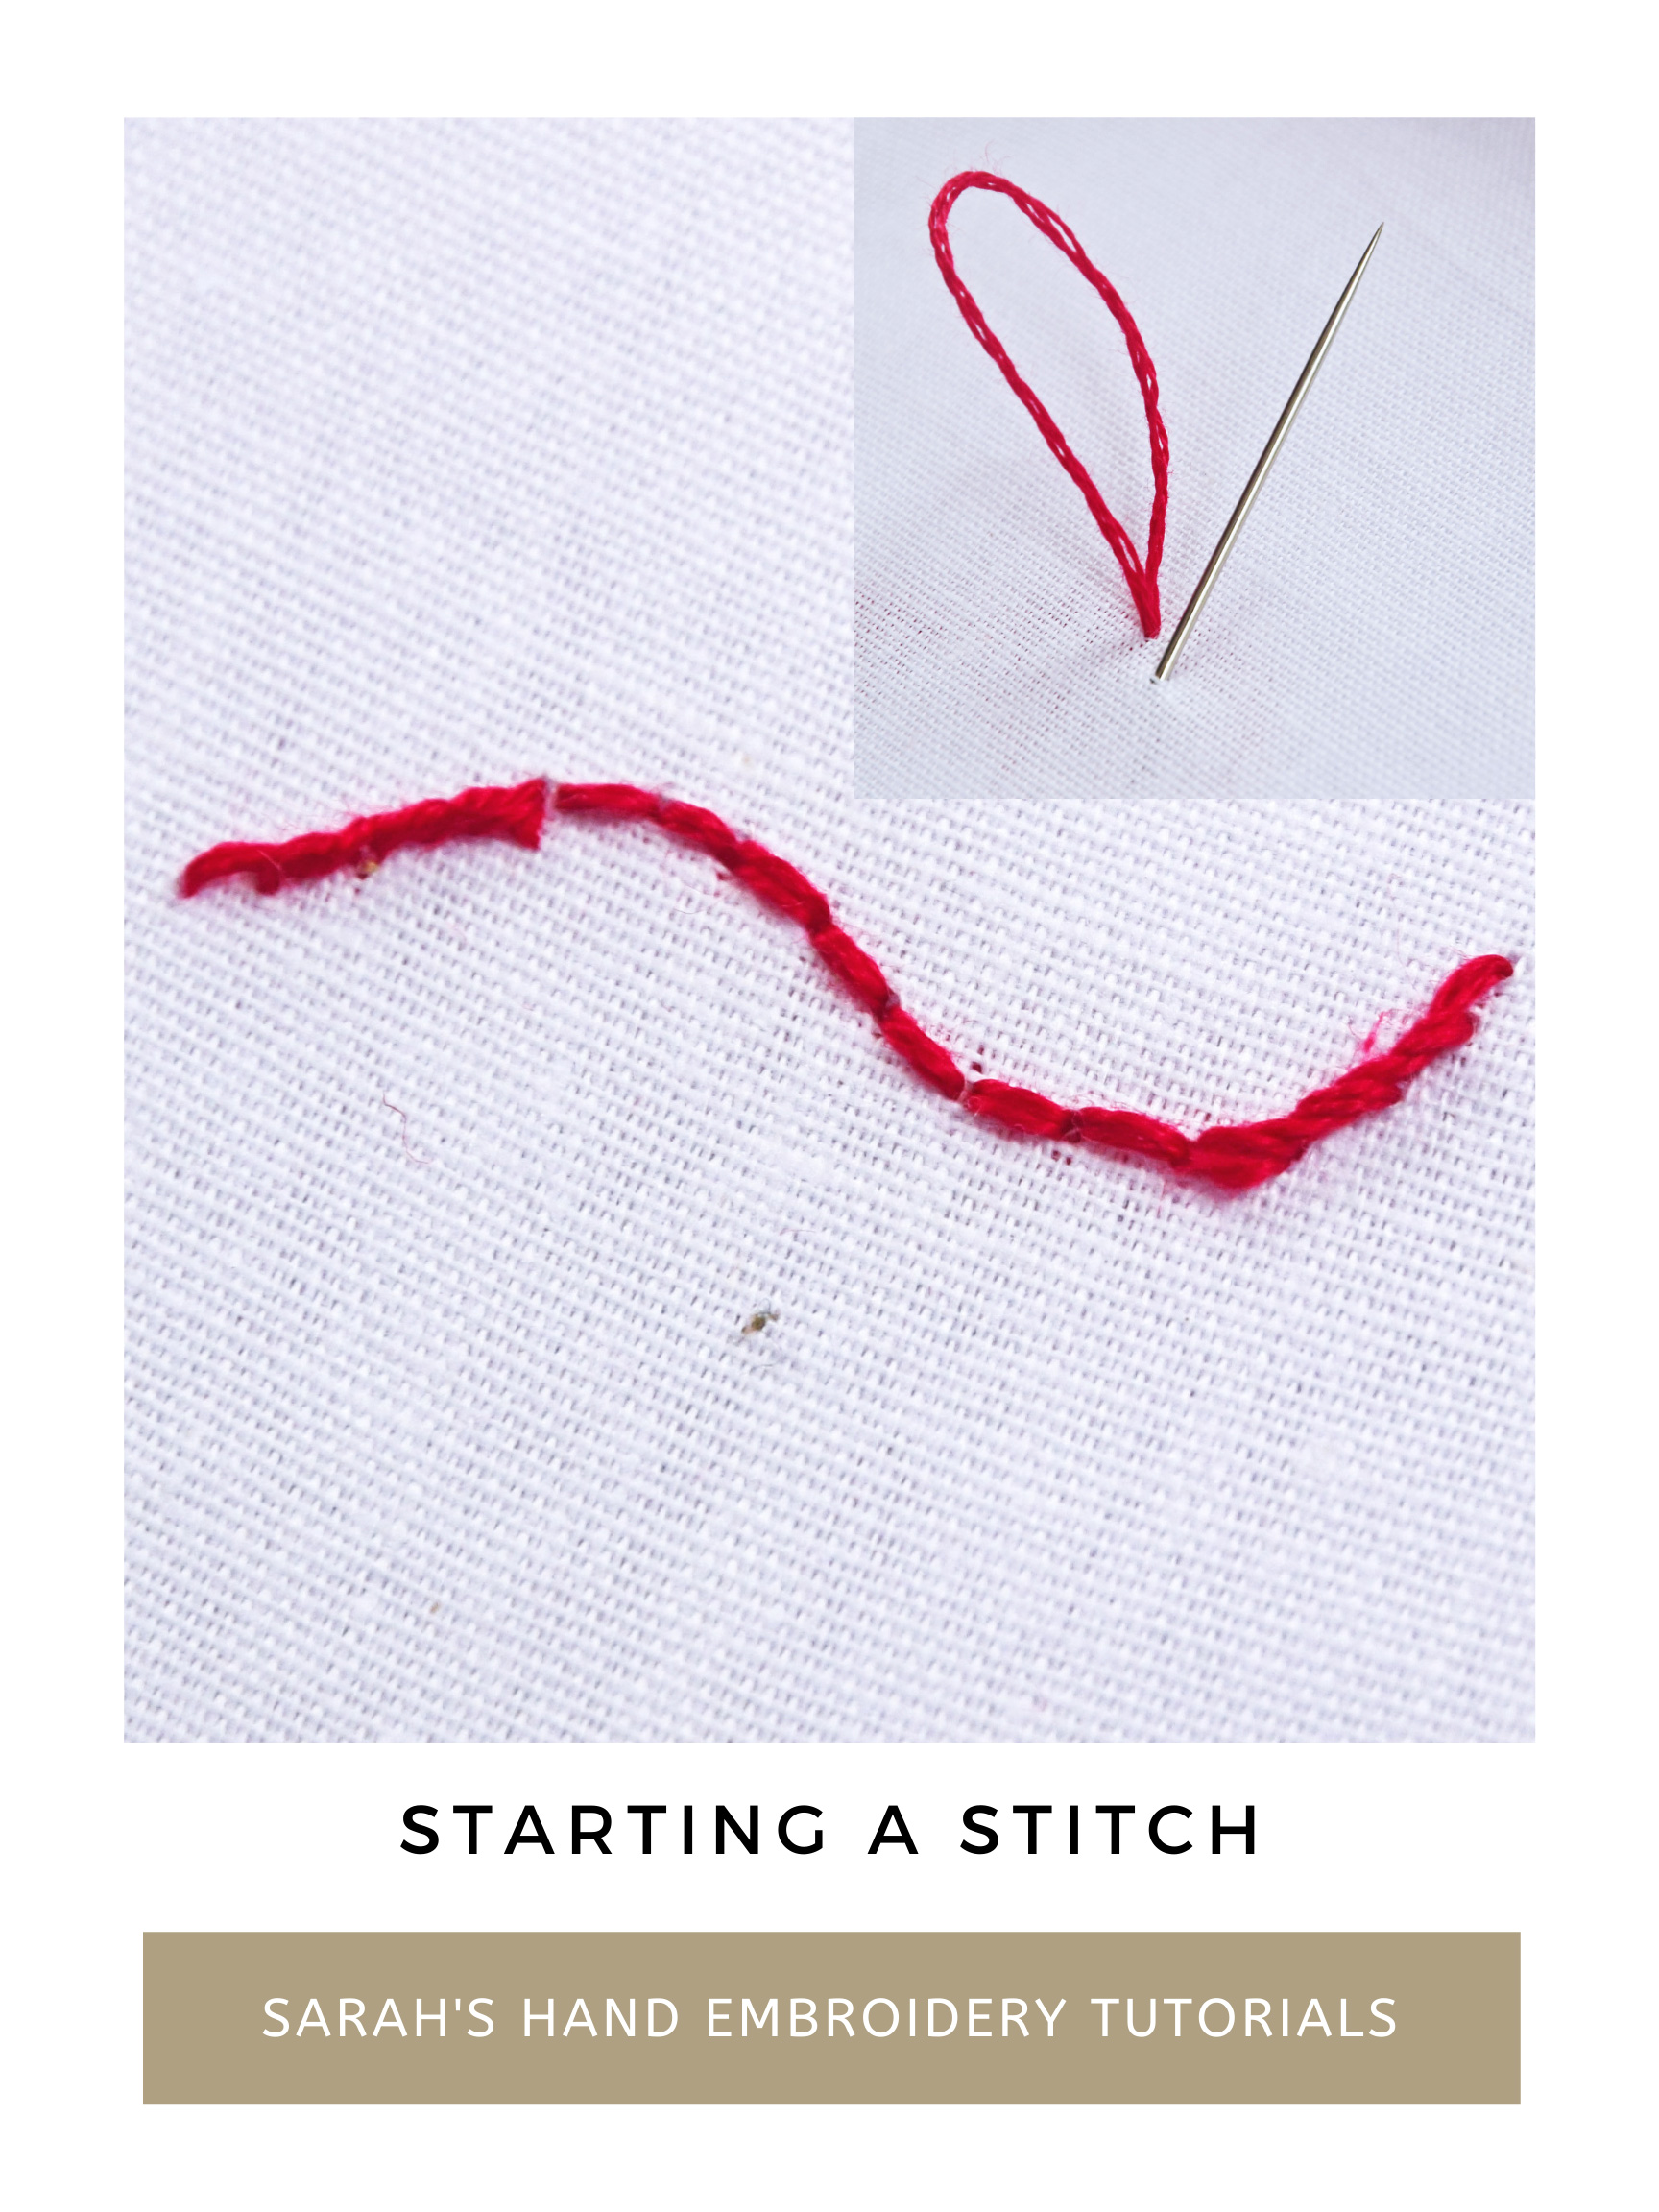 Ladder stitch, invisible stitch, whatever you call her, in my opinion , Invisible Stitch